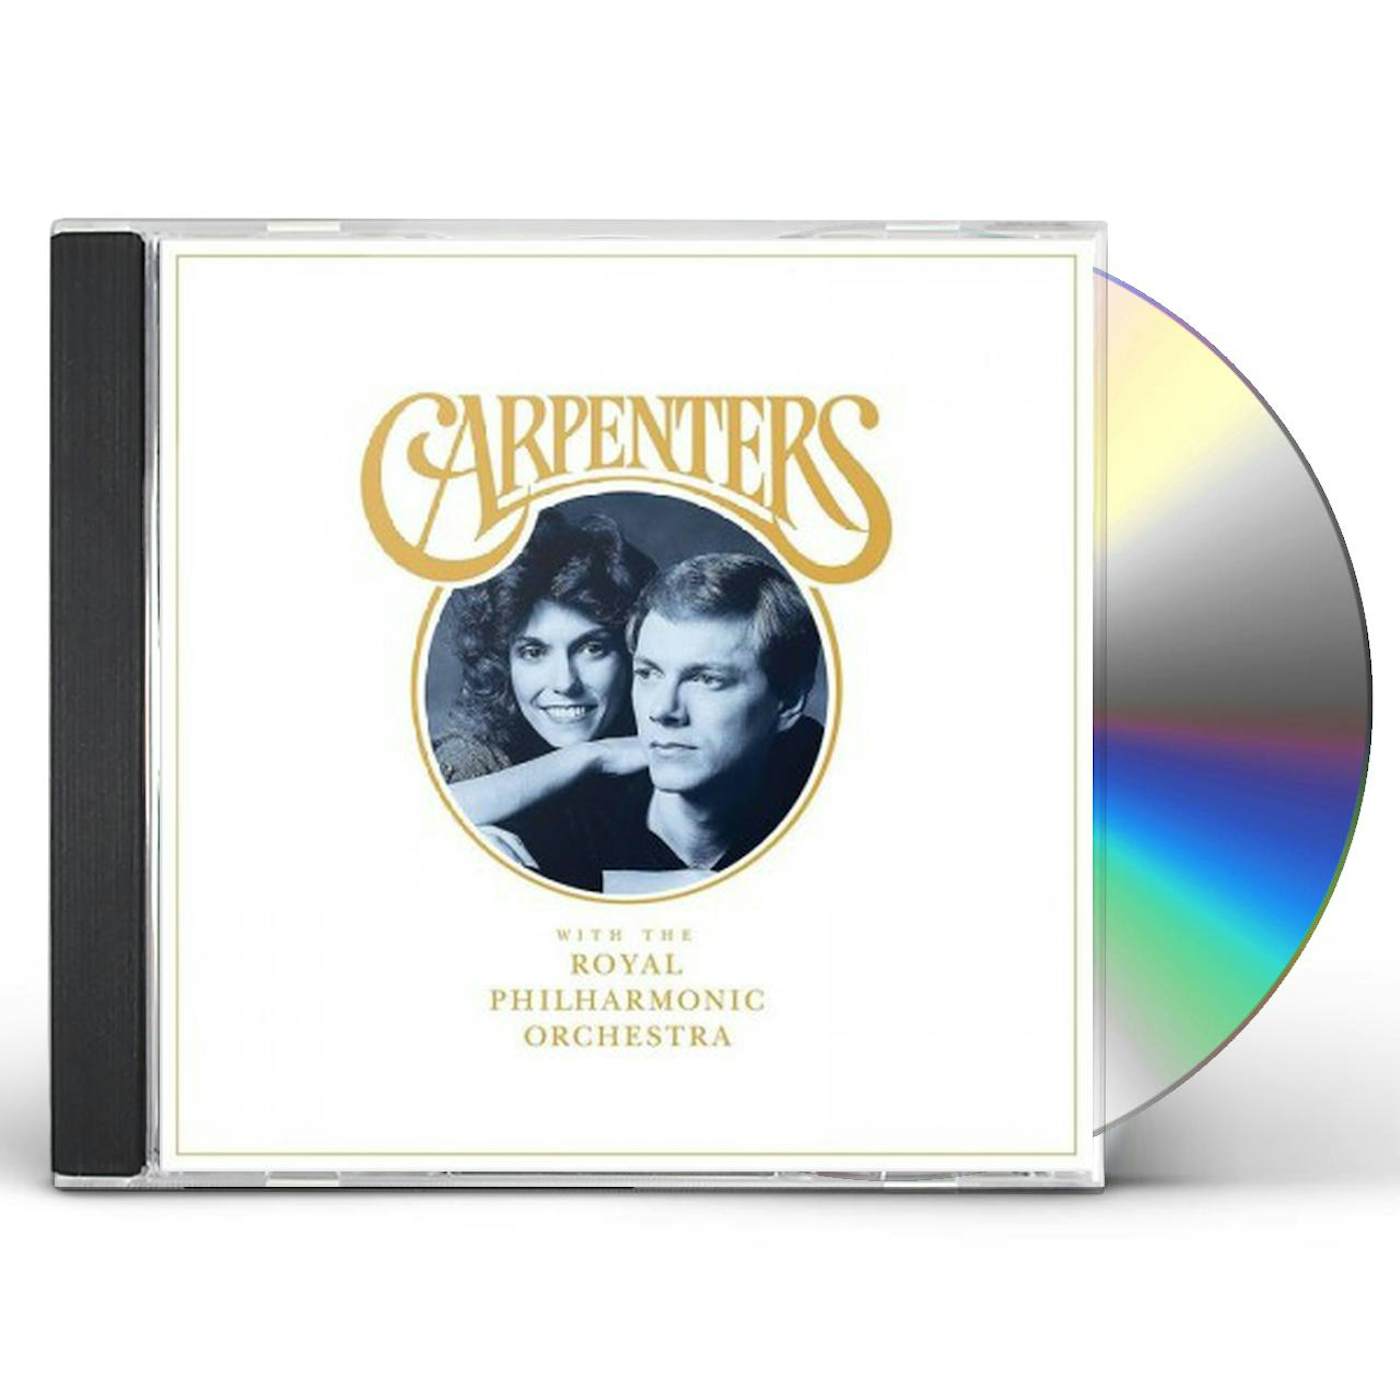 CARPENTERS WITH THE ROYAL PHILHARMONIC ORCHESTRA CD